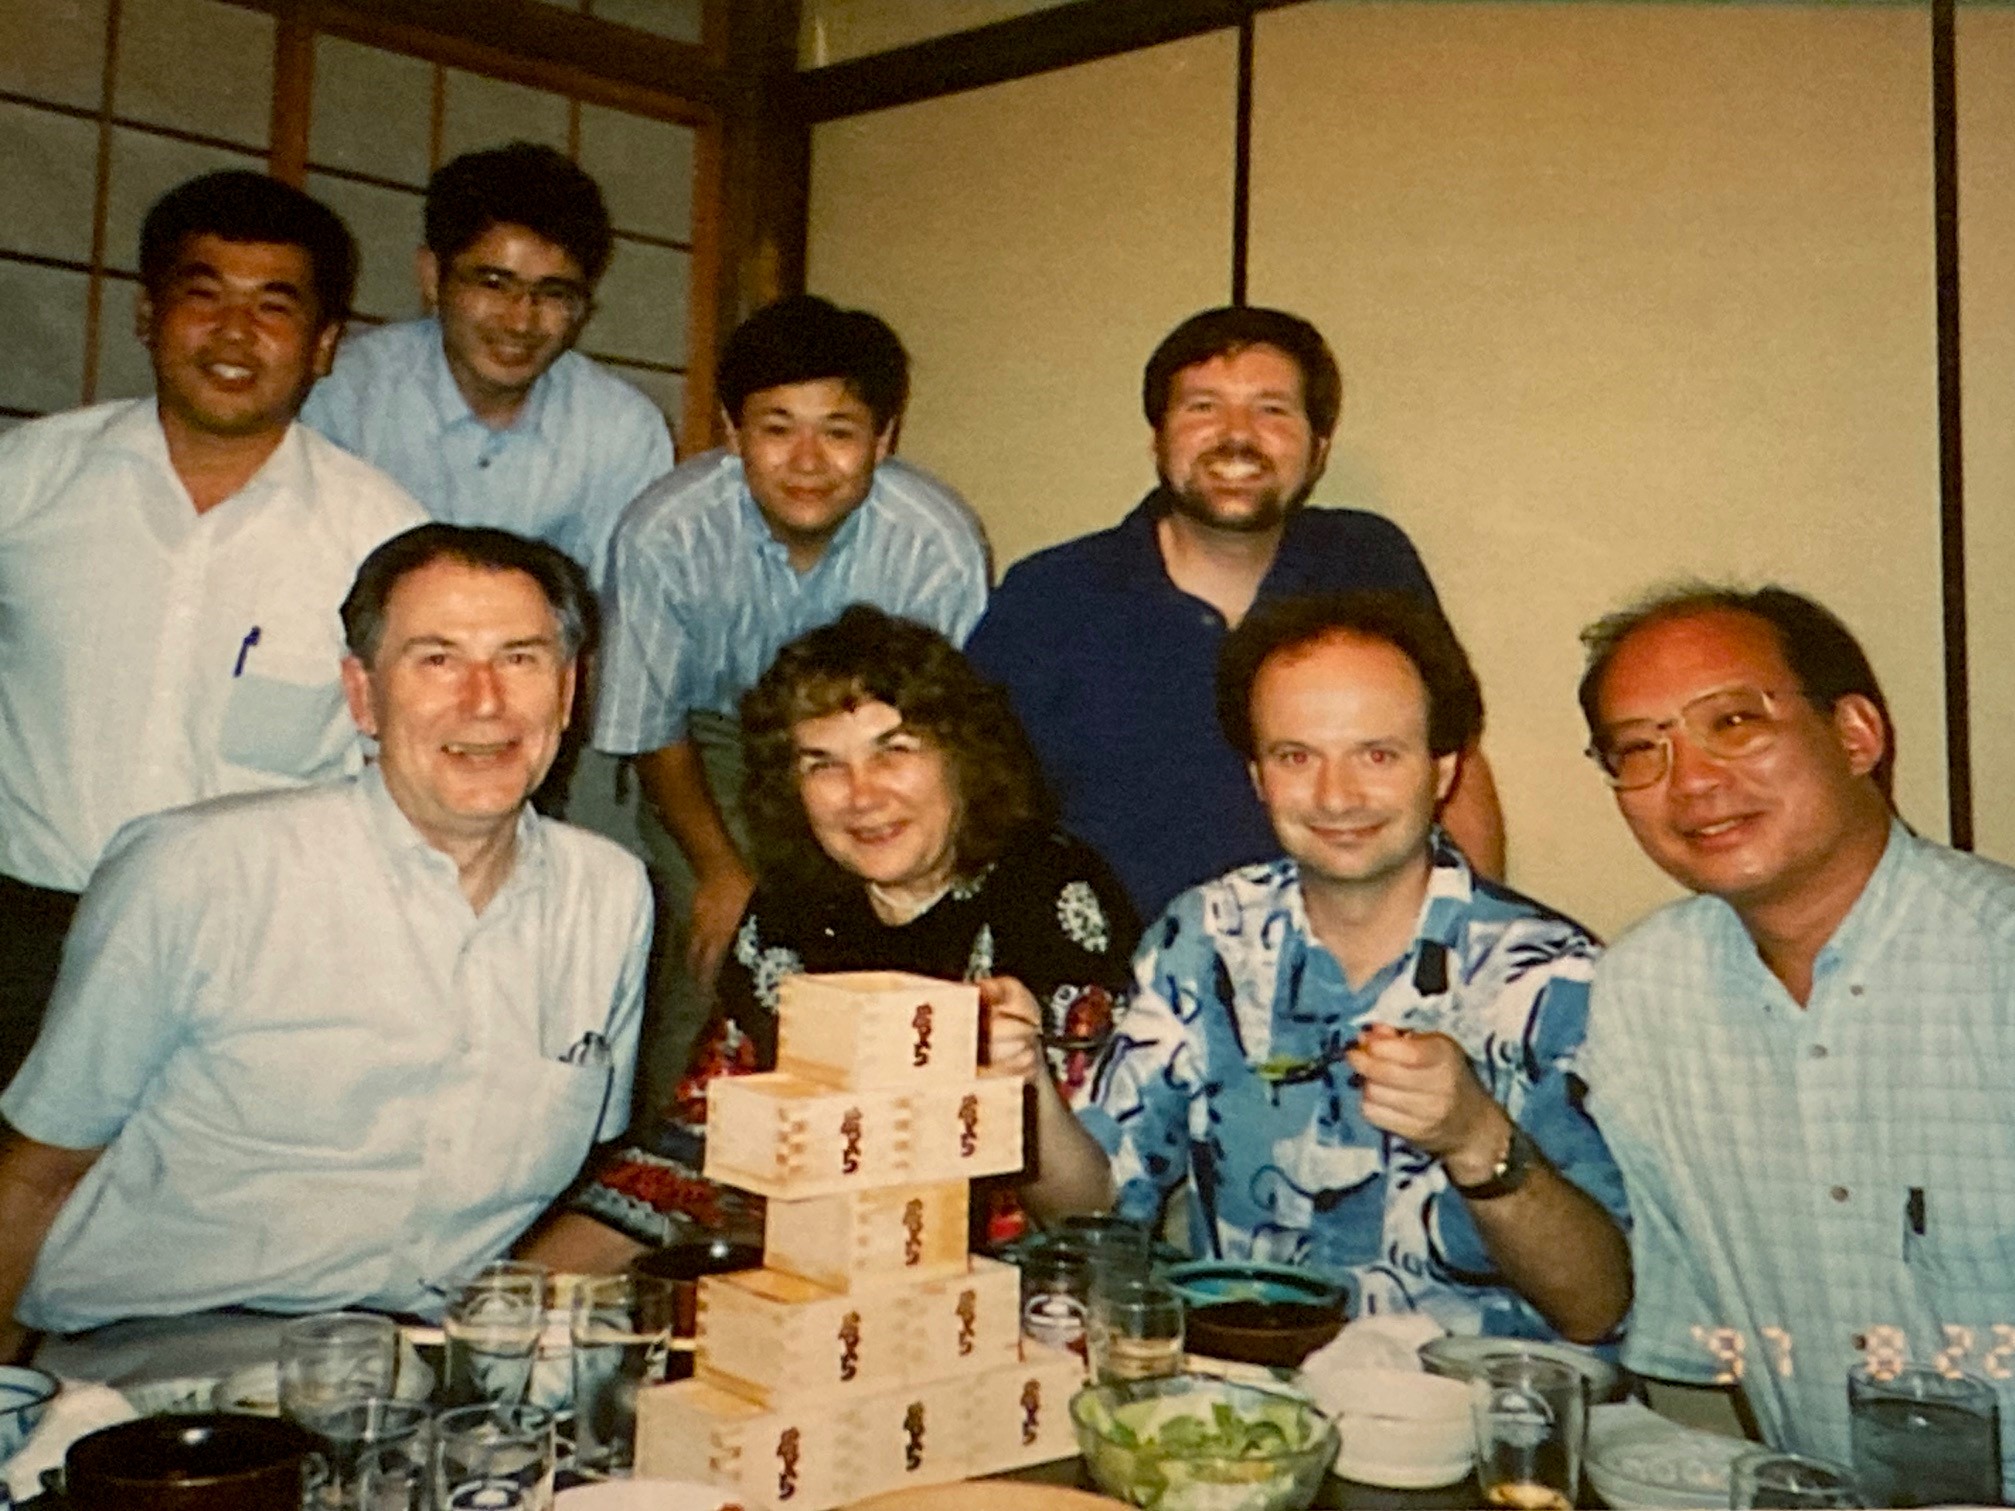 Dr. Sovers during a conference in Japan with wife Zinta